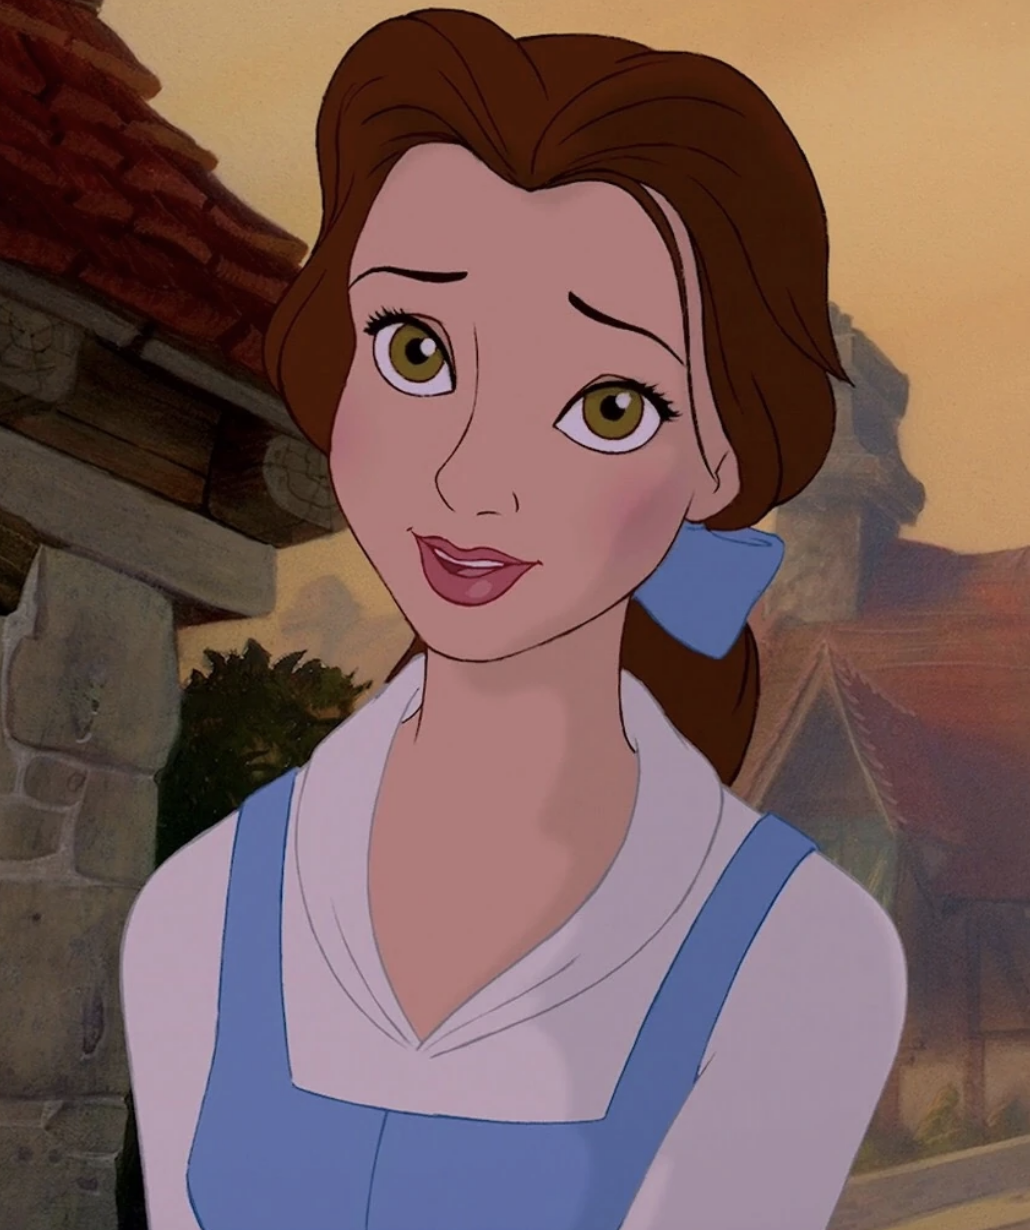 Belle in her white and blue outfit